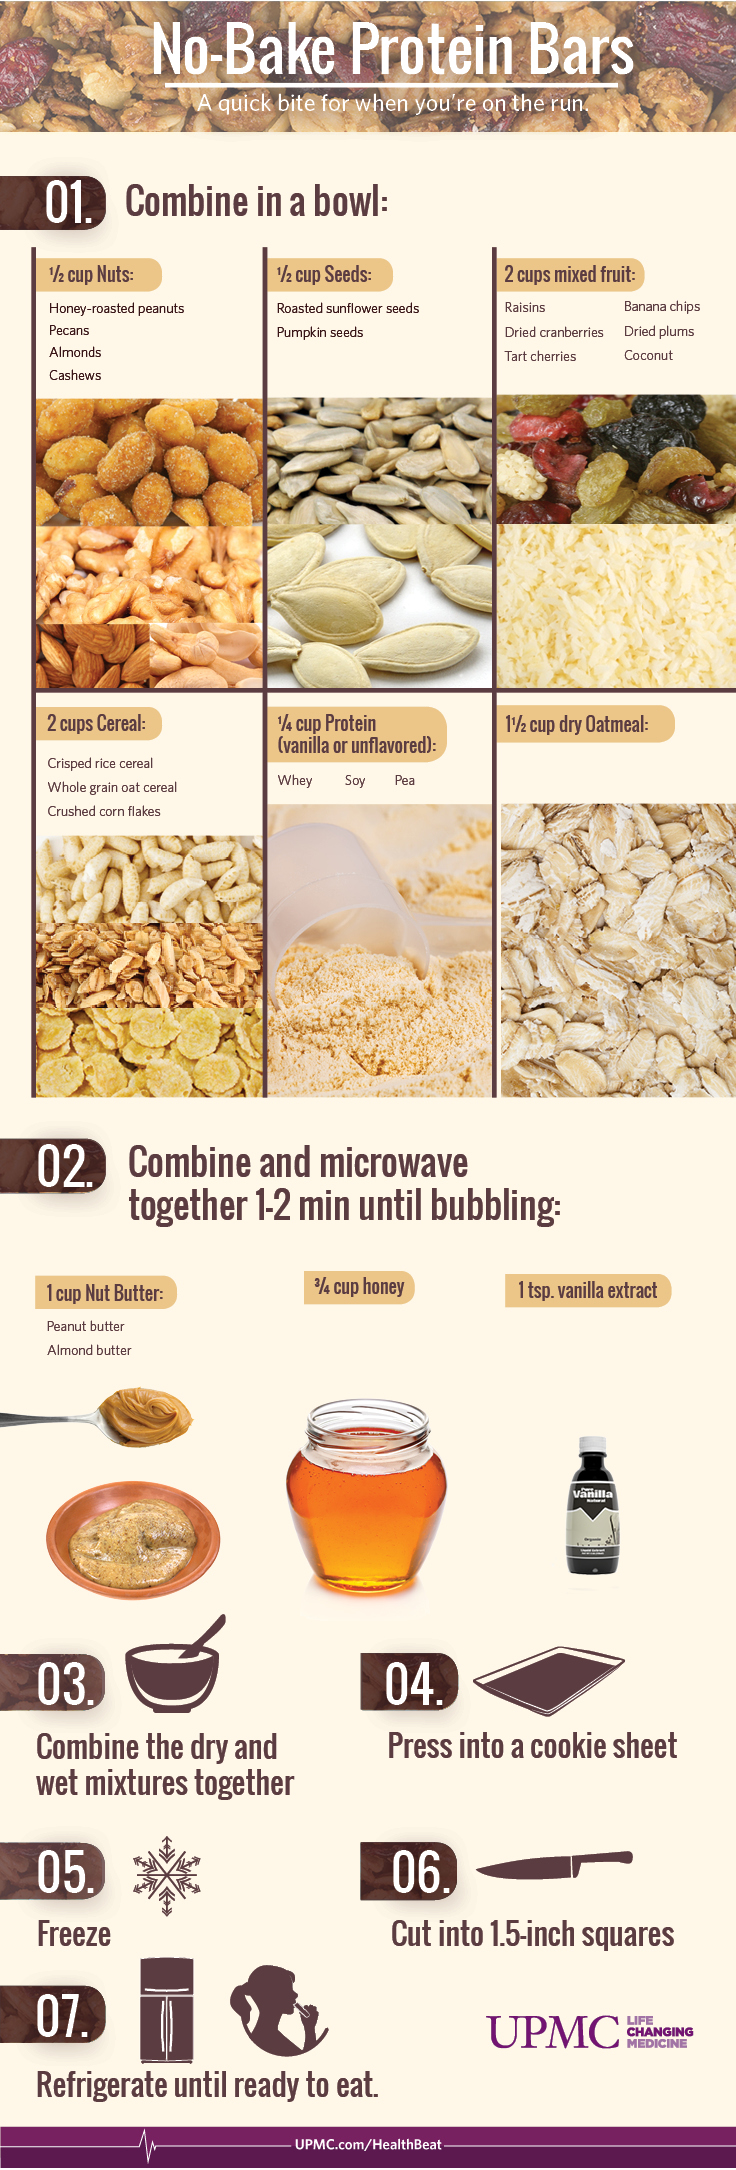 Infographic about No-Bake Protein Bars